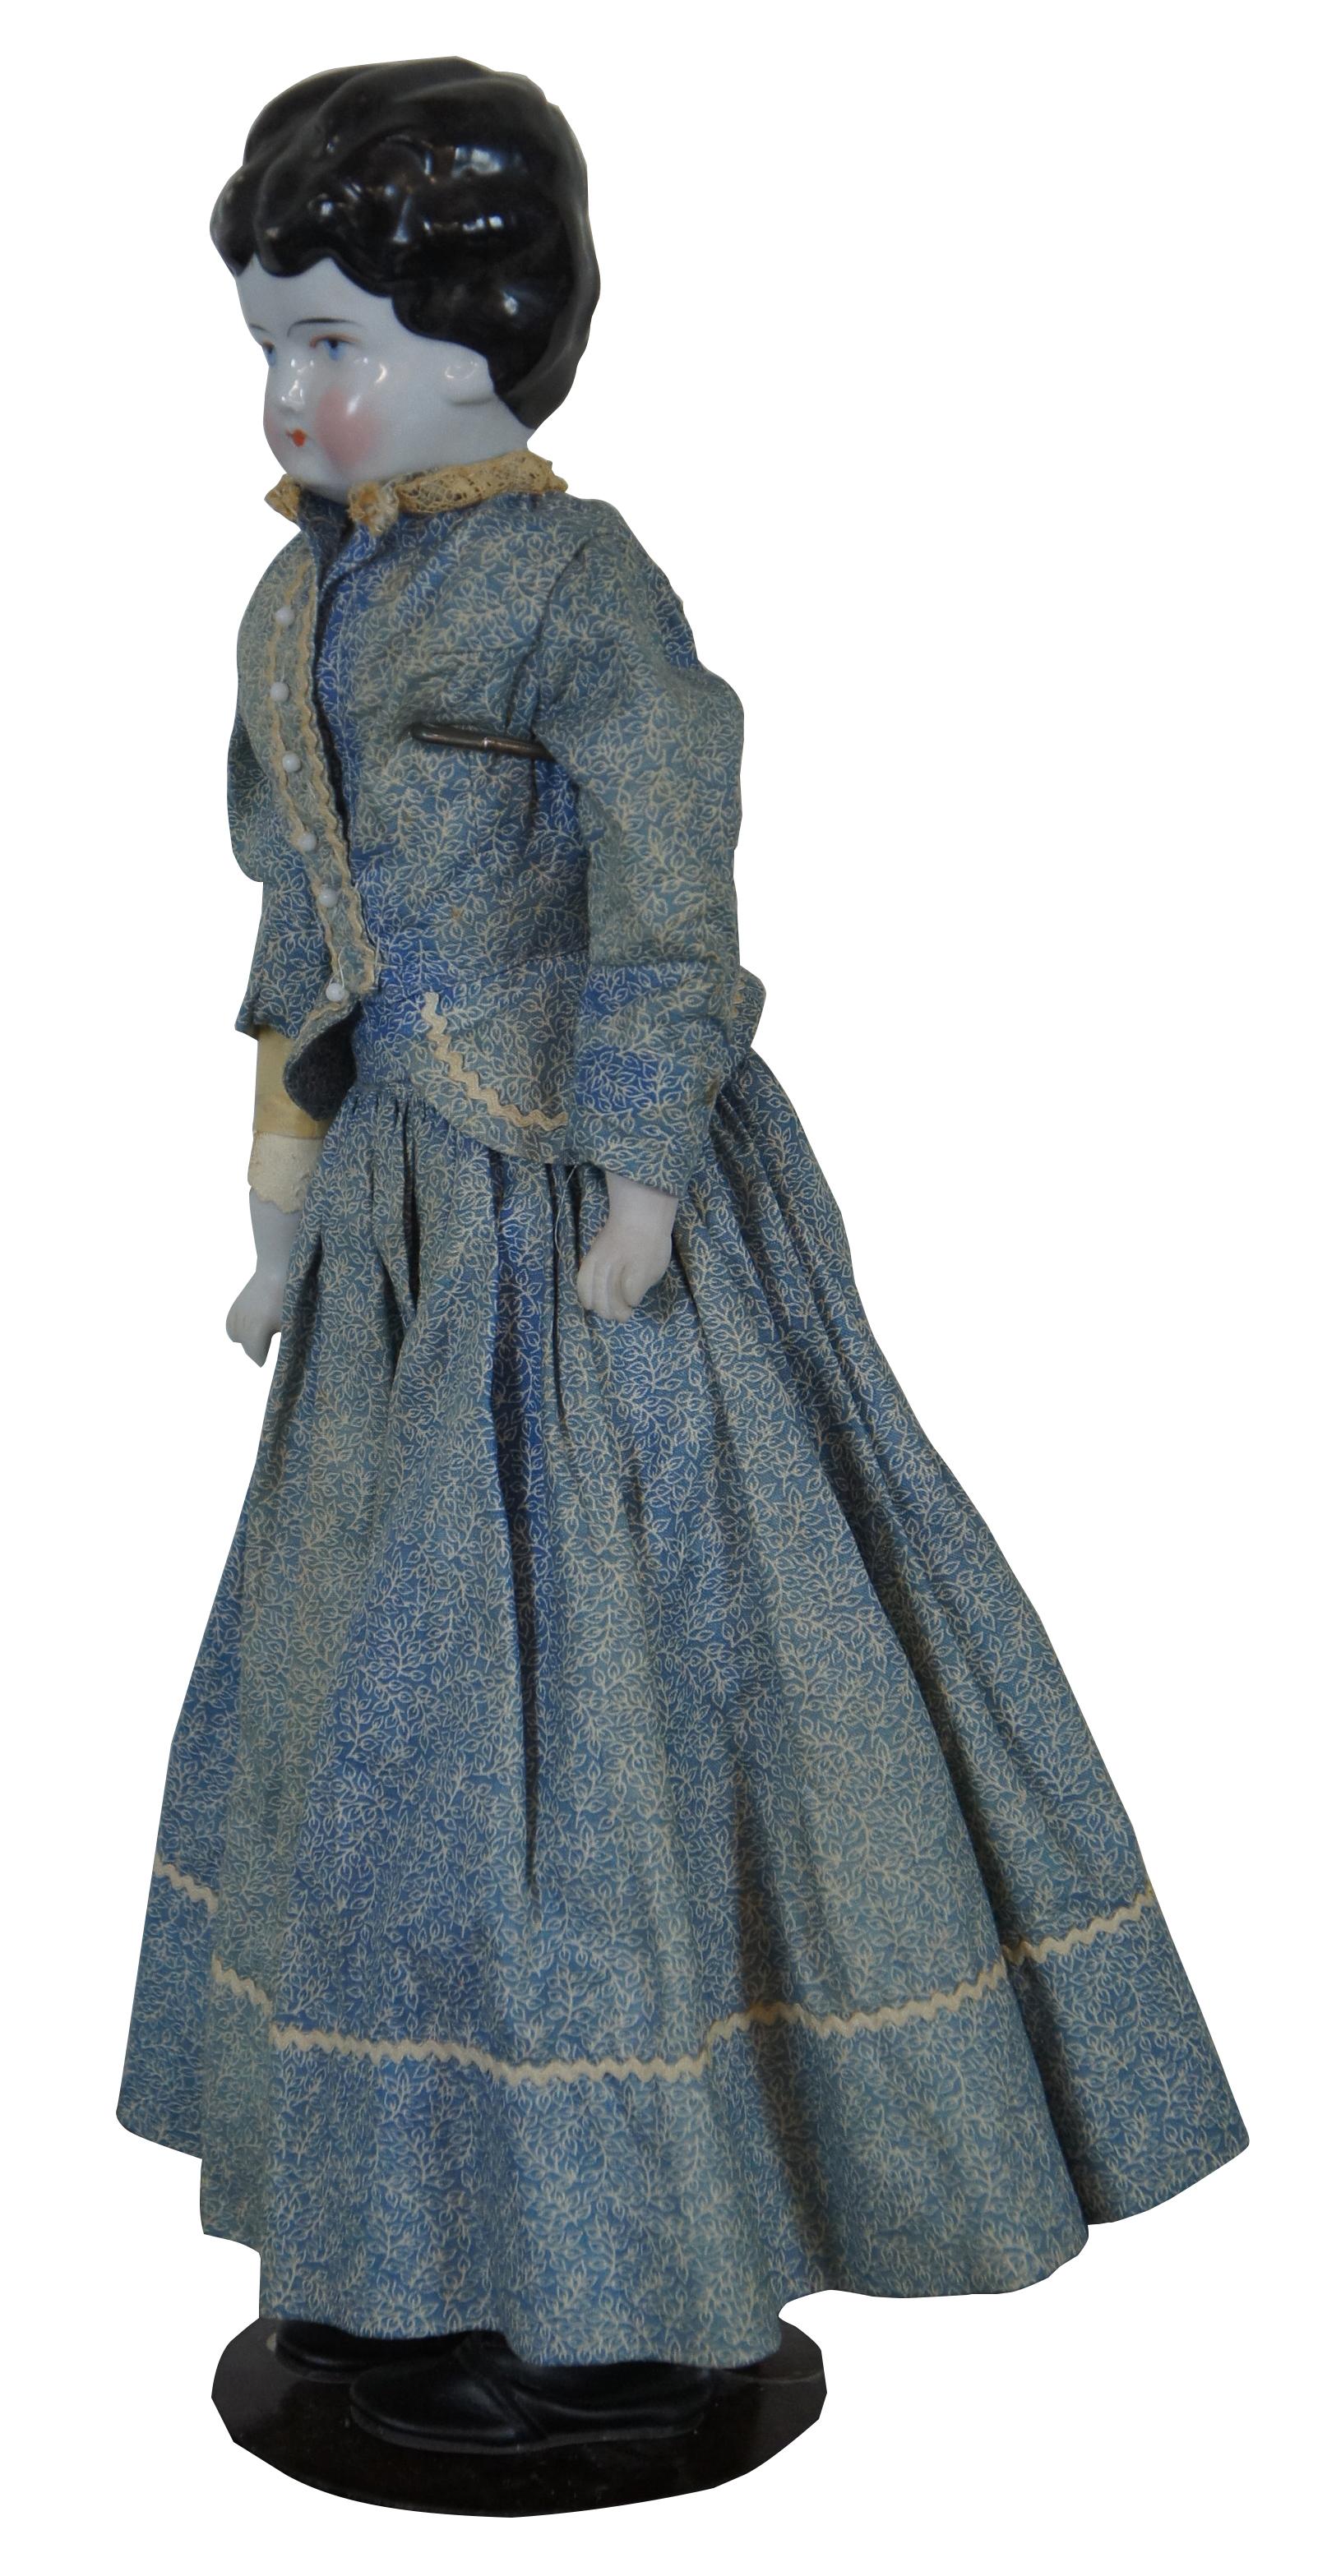 Antique china doll with black hair and blue eyes, dressed in a blue Victorian outfit; head and hands are porcelain, body is leather, circa 1850.
 